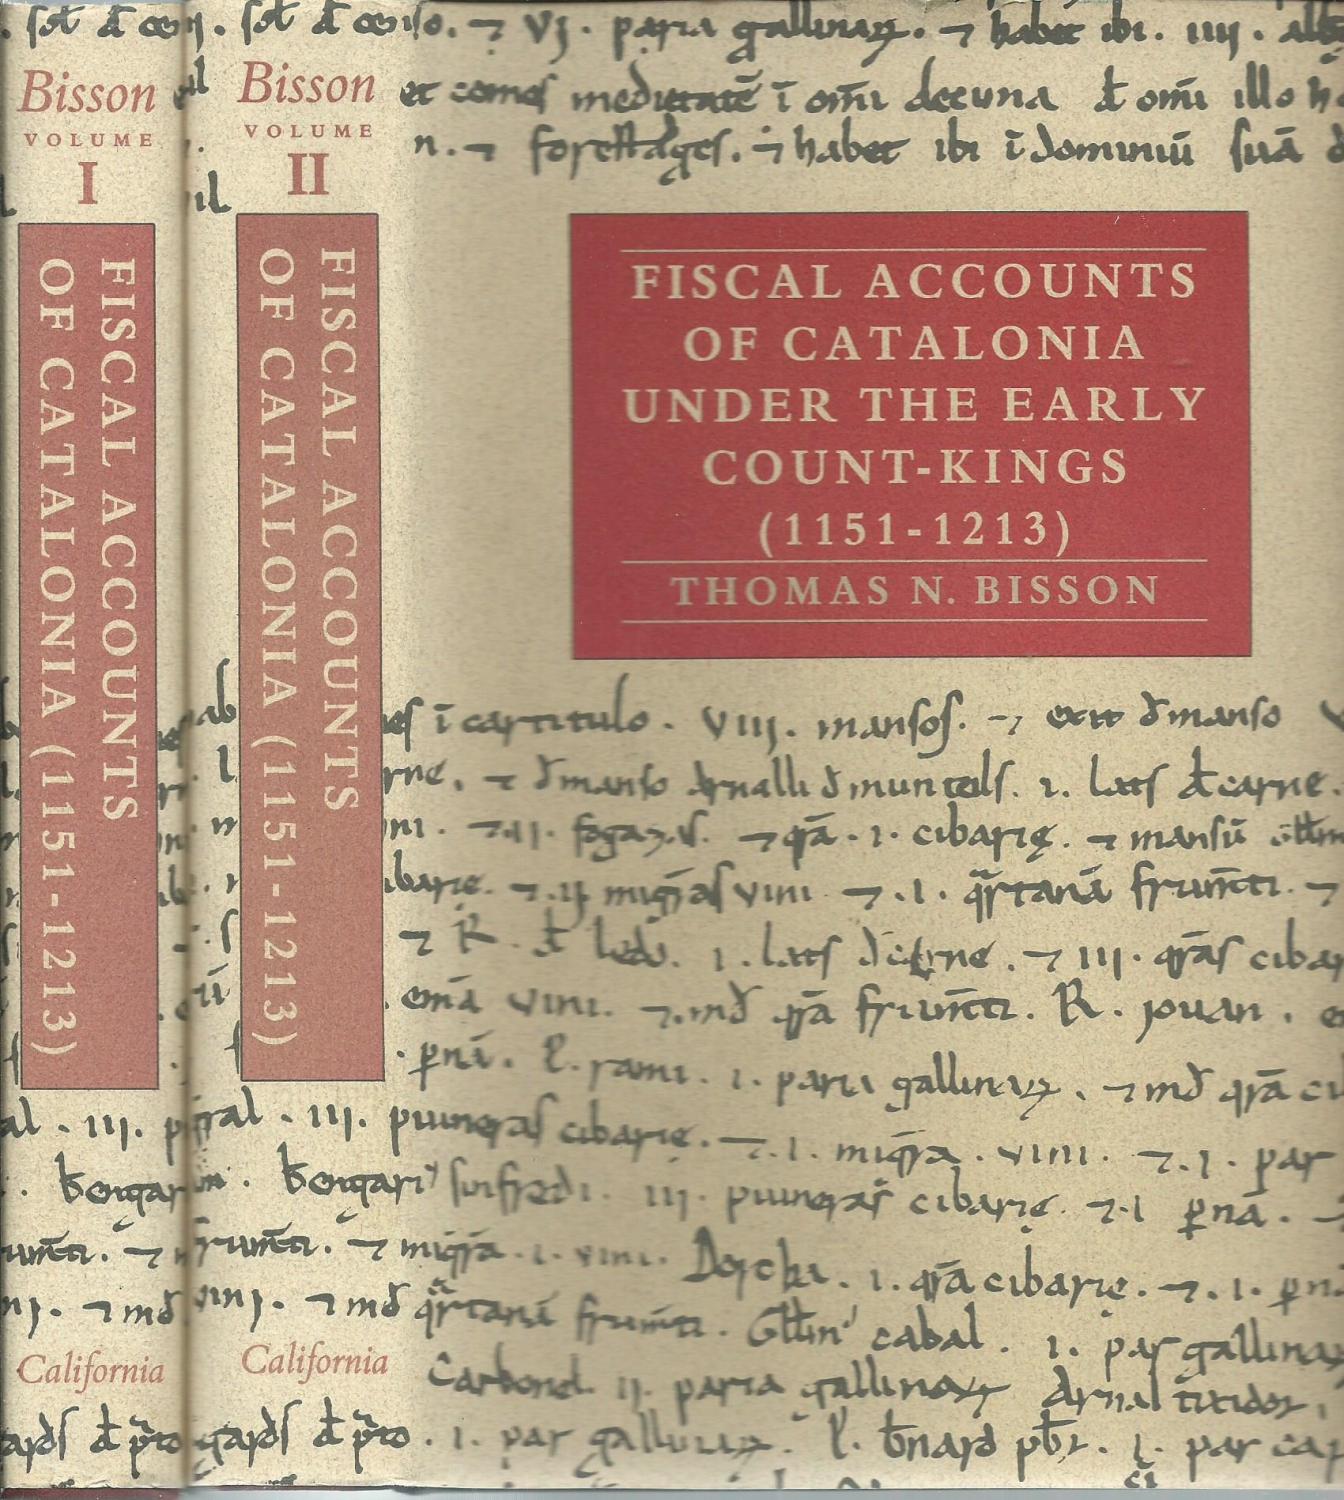 Fiscal Accounts of Catalonia Under the Early Count-Kings (1151-1213), Volume I: